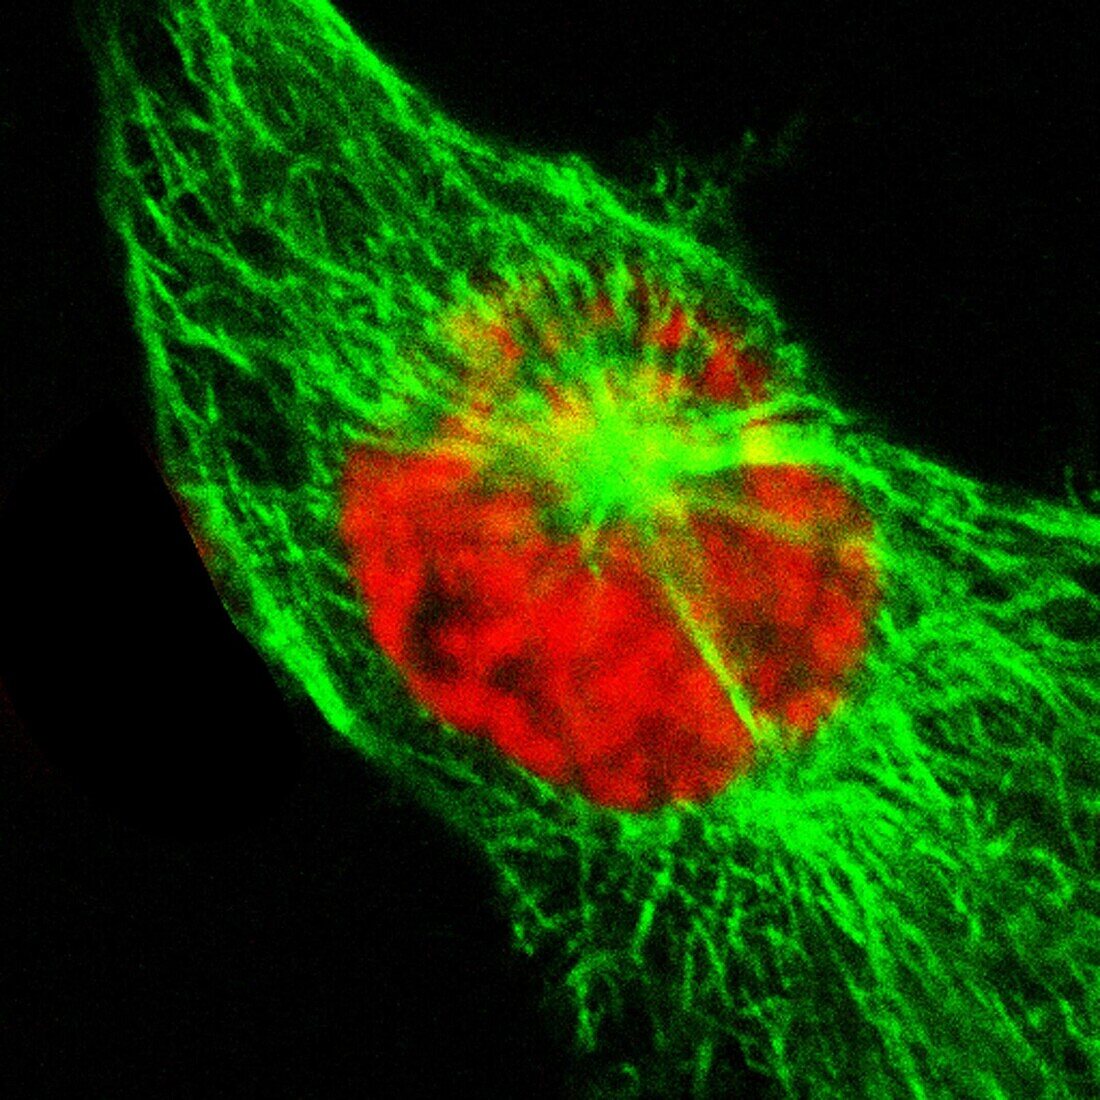 Human cell in early prophase, light micrograph